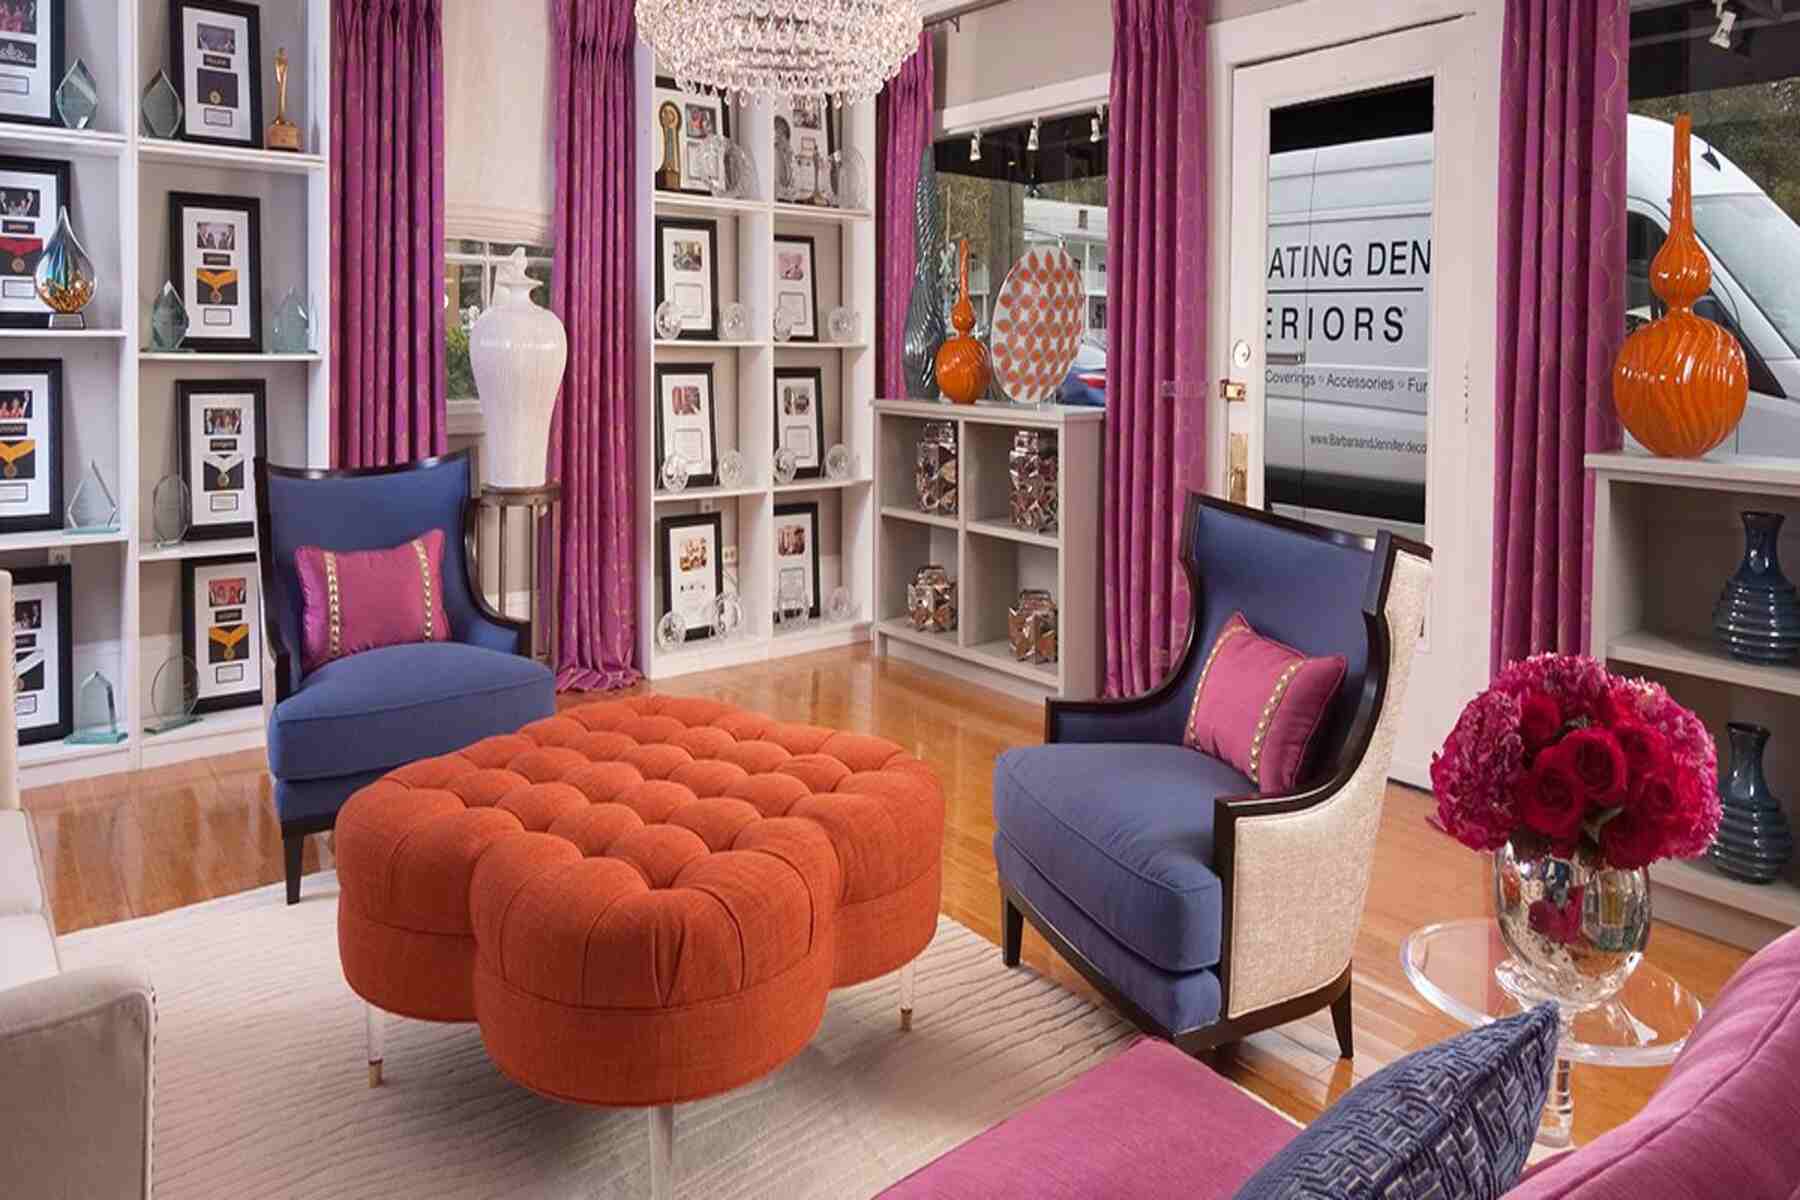 A room with bold colored chairs and curtains